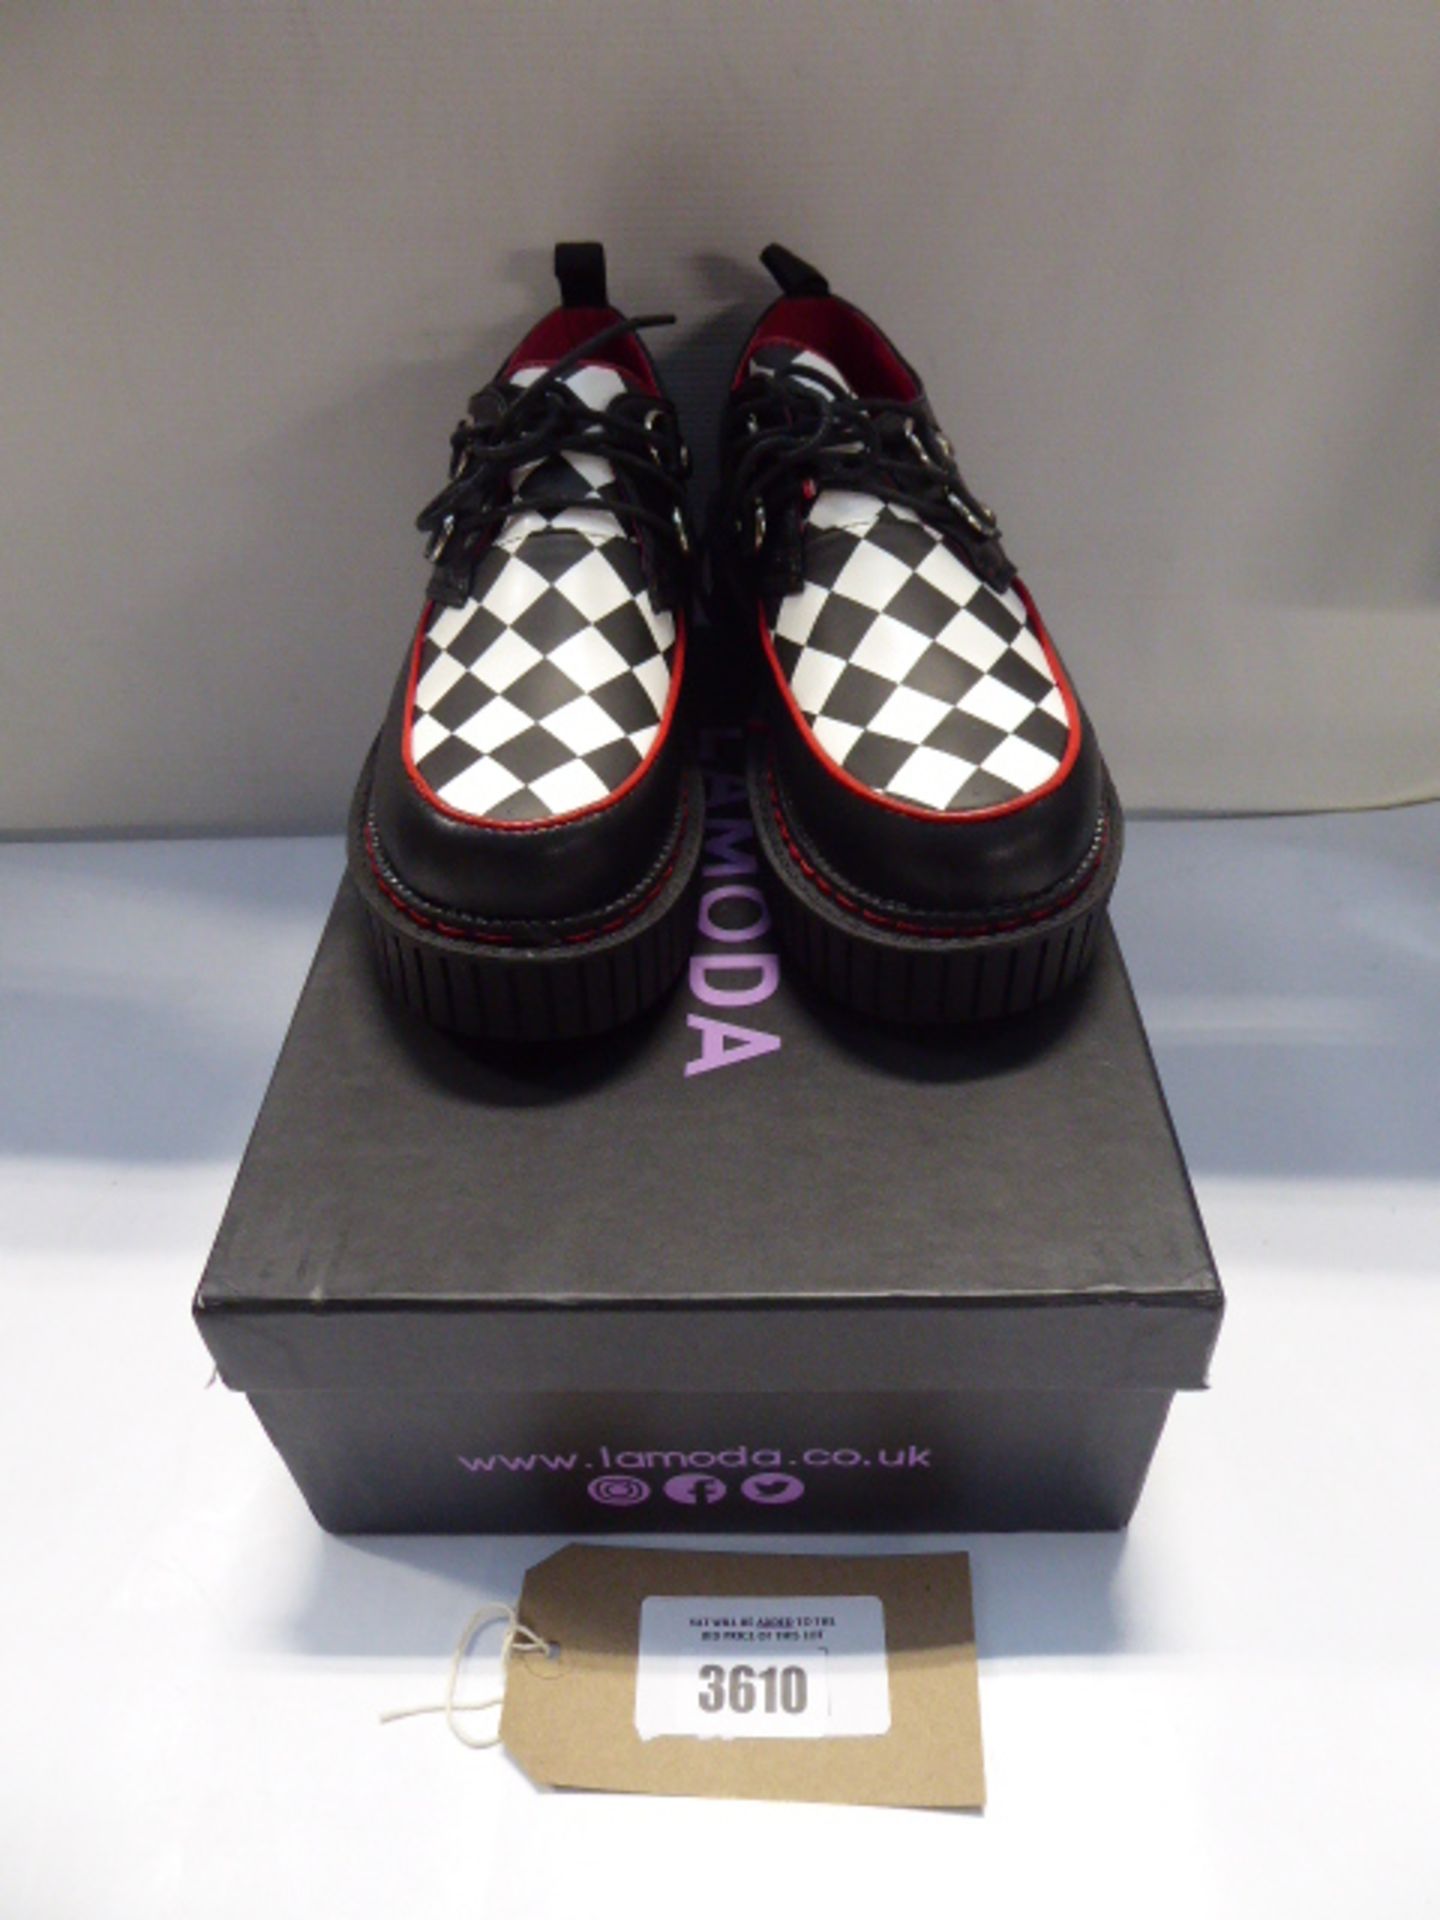 A pair of red/black checkerboard La Moda Creepers UK 6